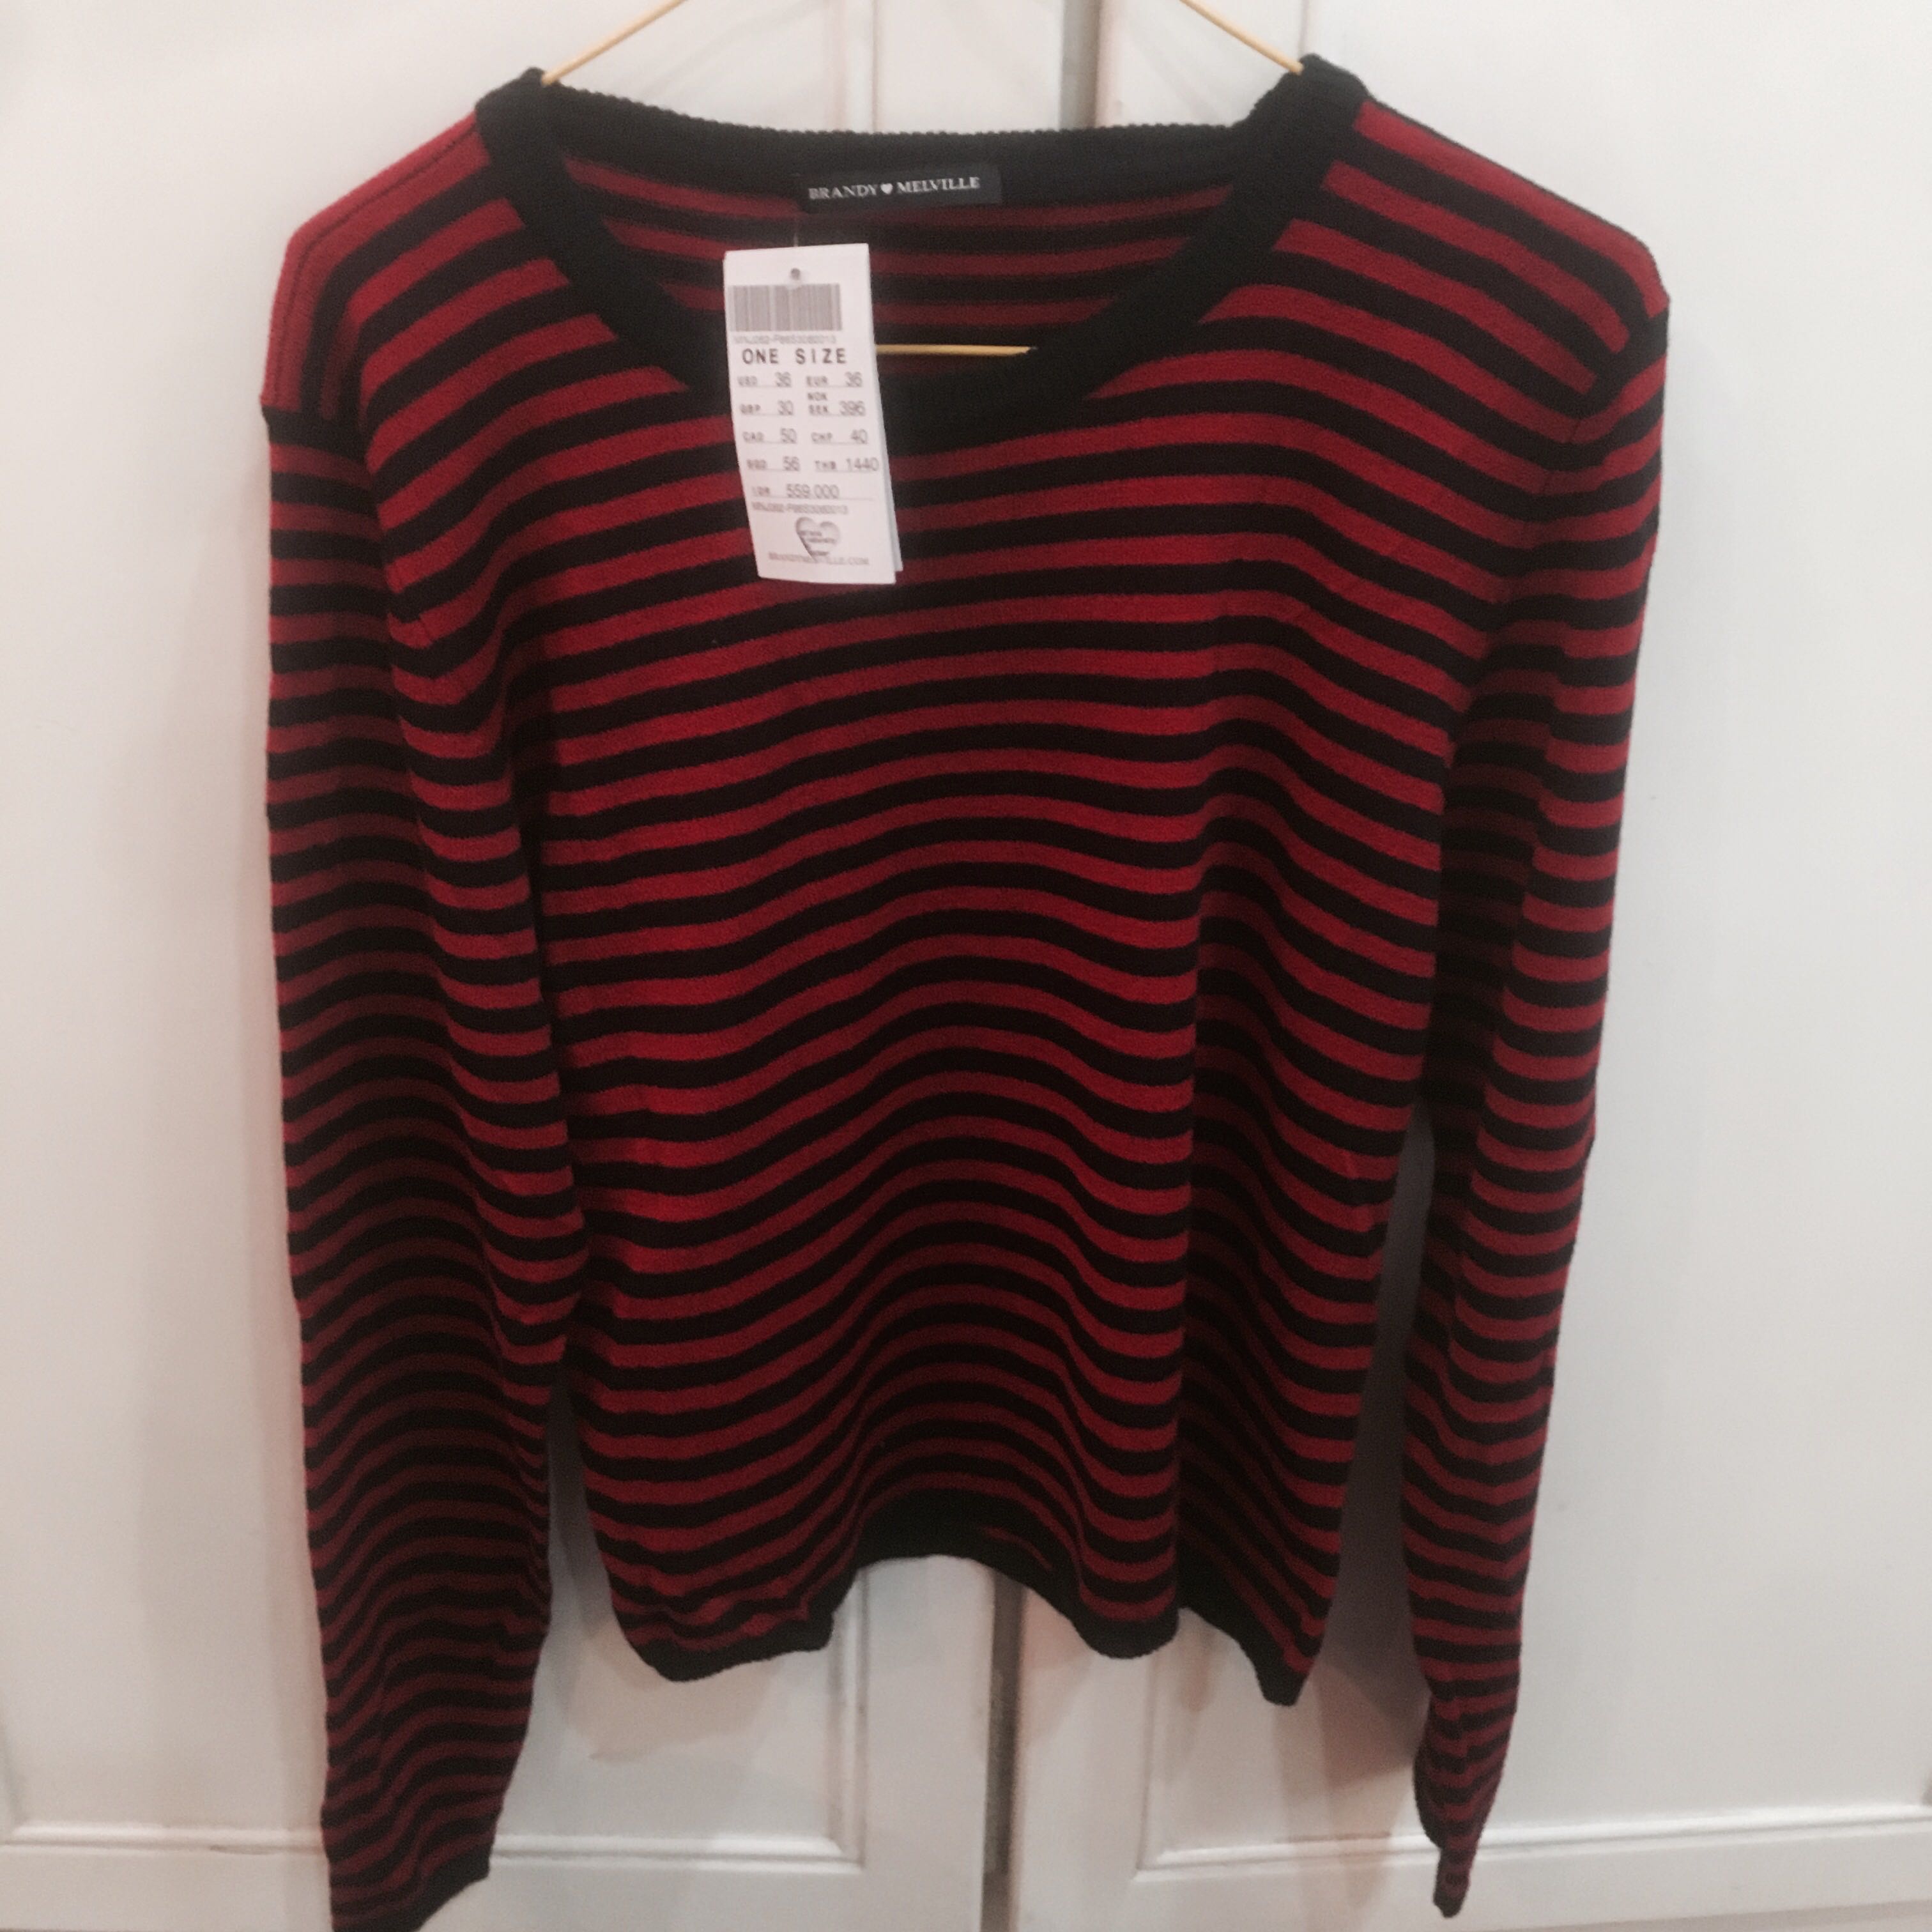 BNWT brandy Melville red and black 